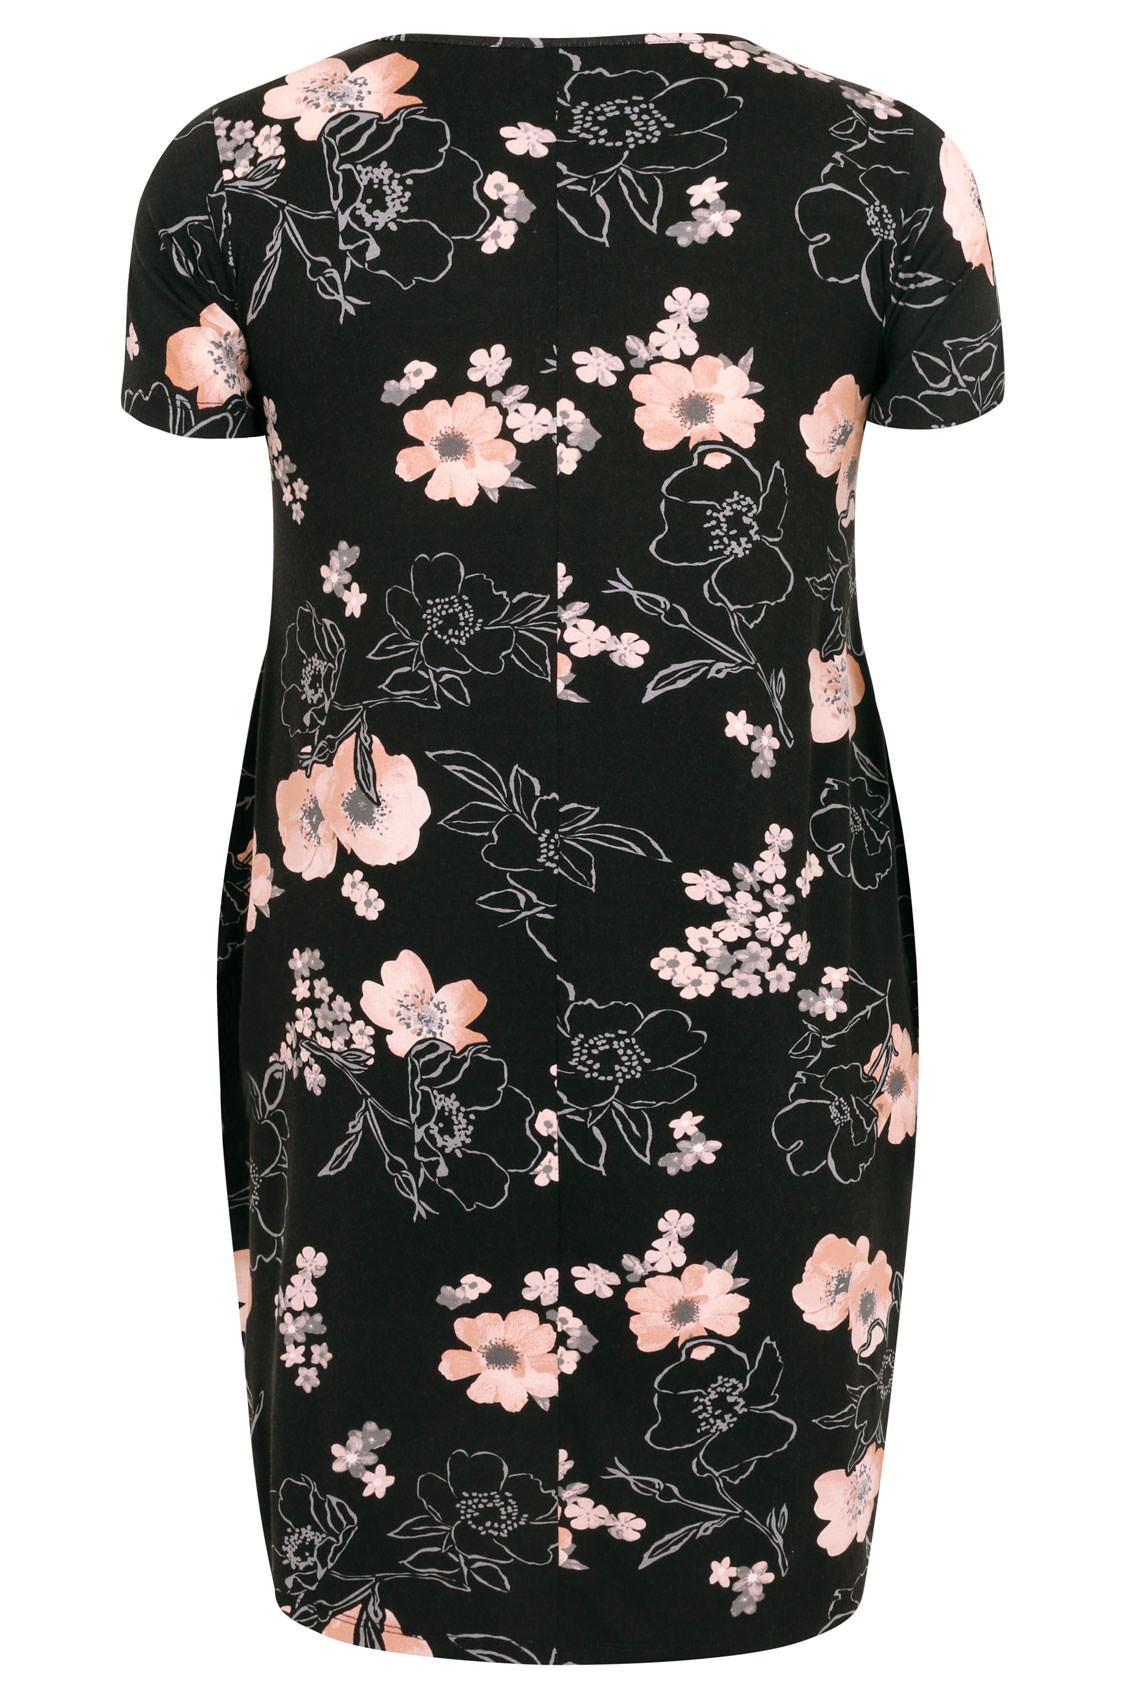 Black & Multi Floral Print Dress With Drop Pockets, Plus size 16 to 36